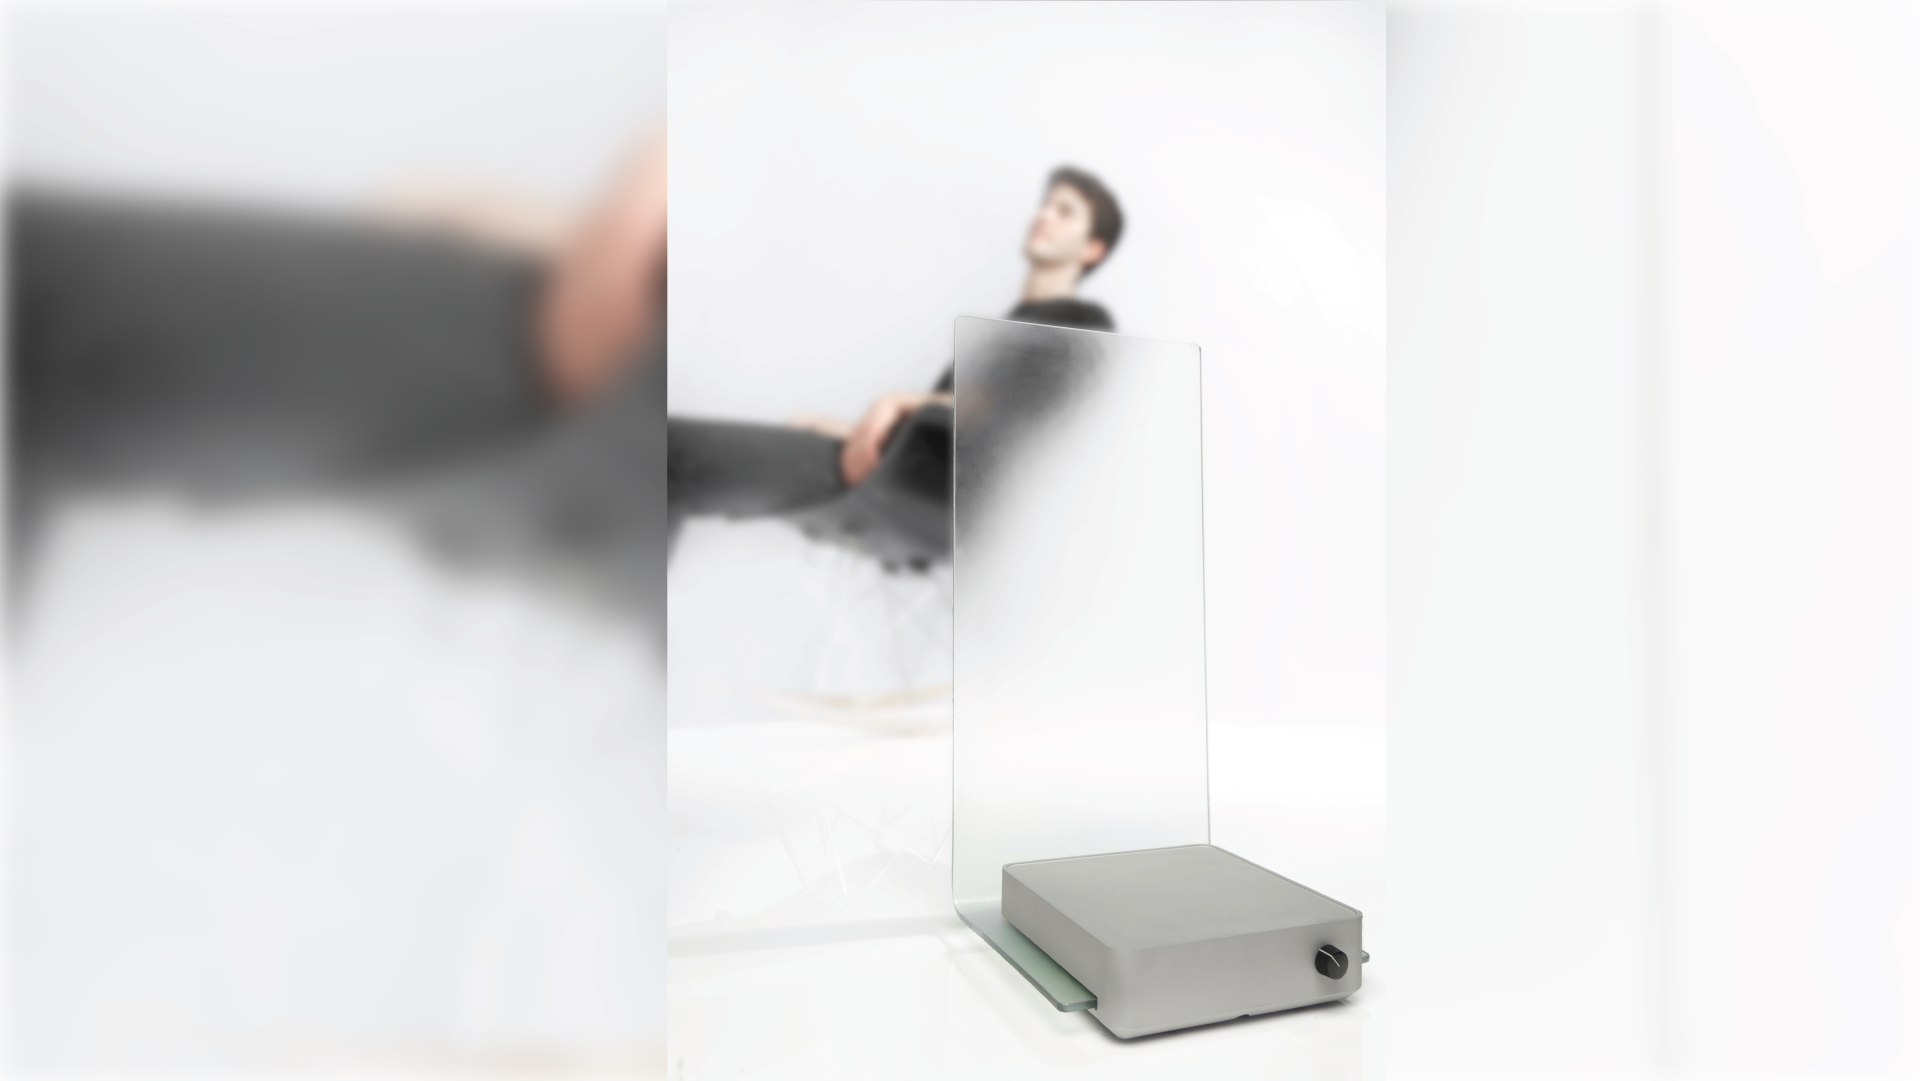 A desktop noise generator in a rectangular format with a  frost glass barrier. Image of a person sitting on a chair on the background.